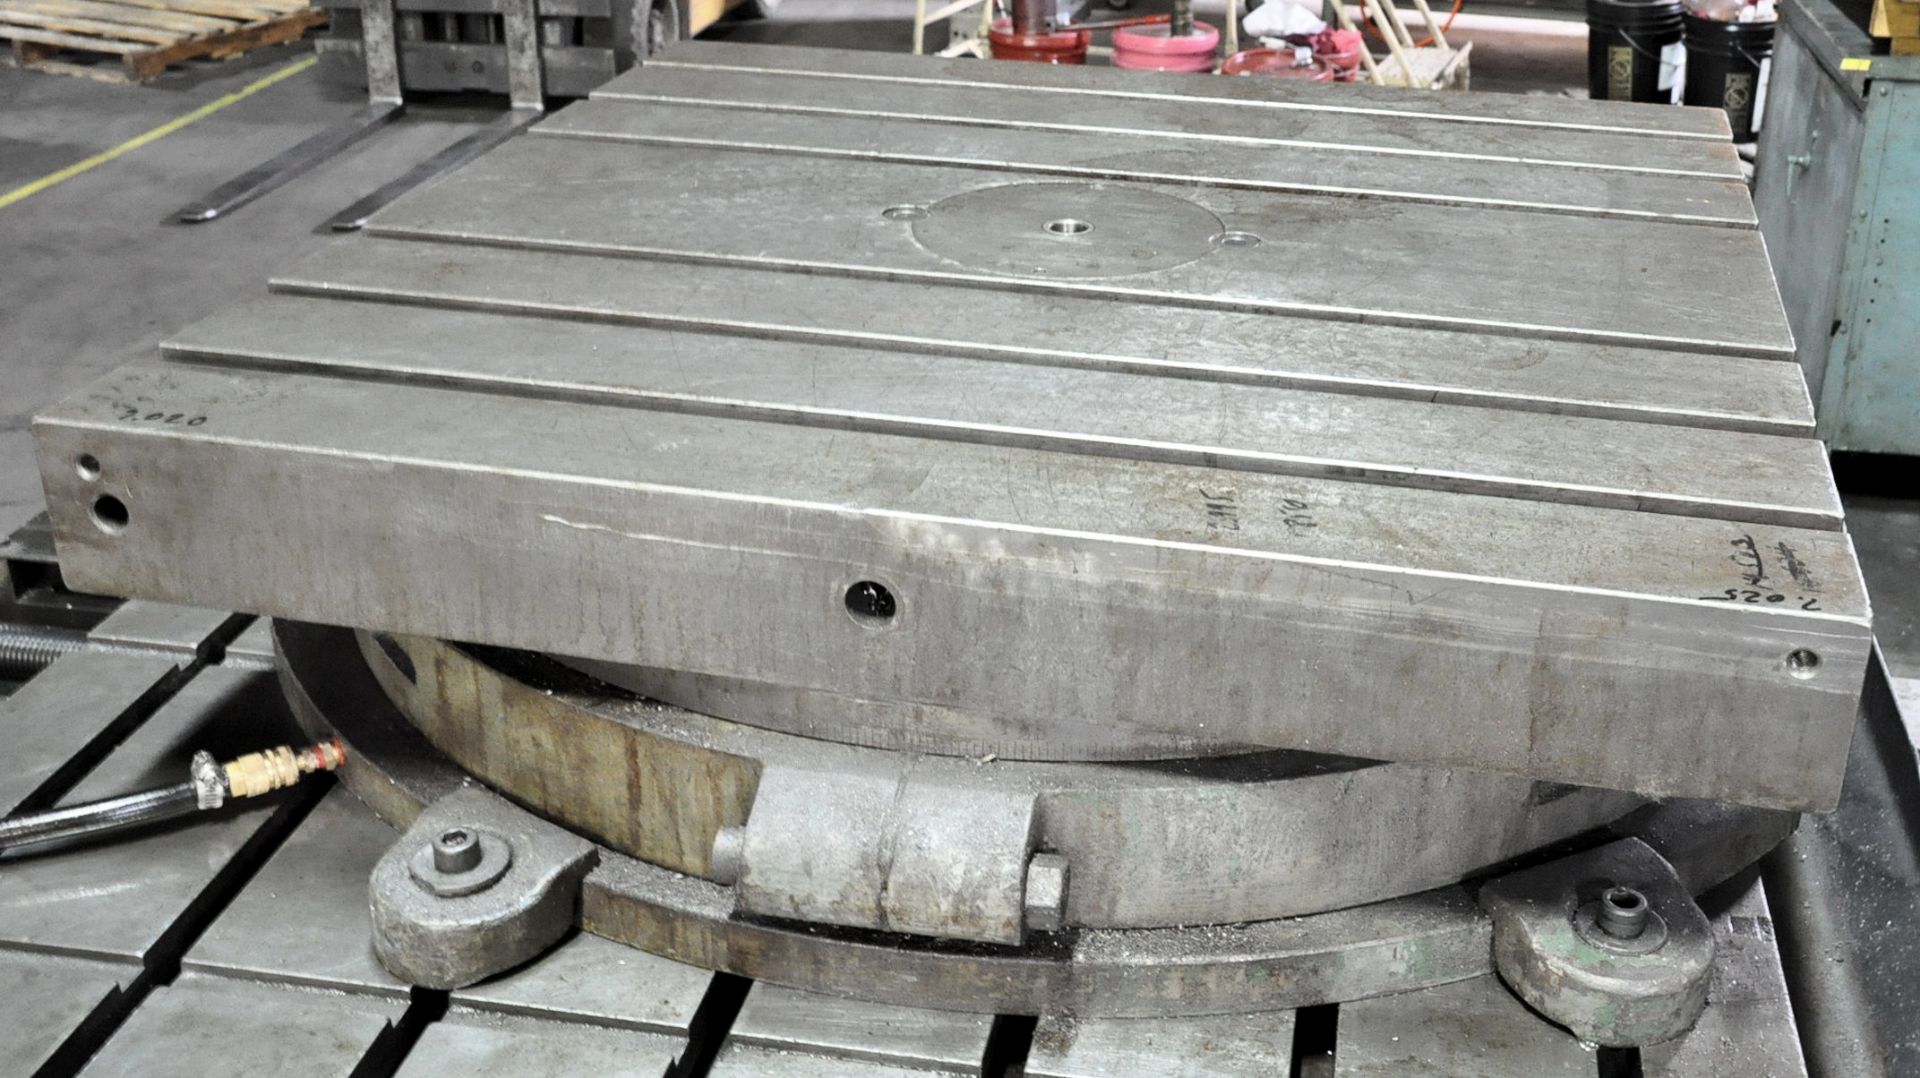 36" x 36" T-Slotted Air Lift Rotary Table - Image 2 of 2